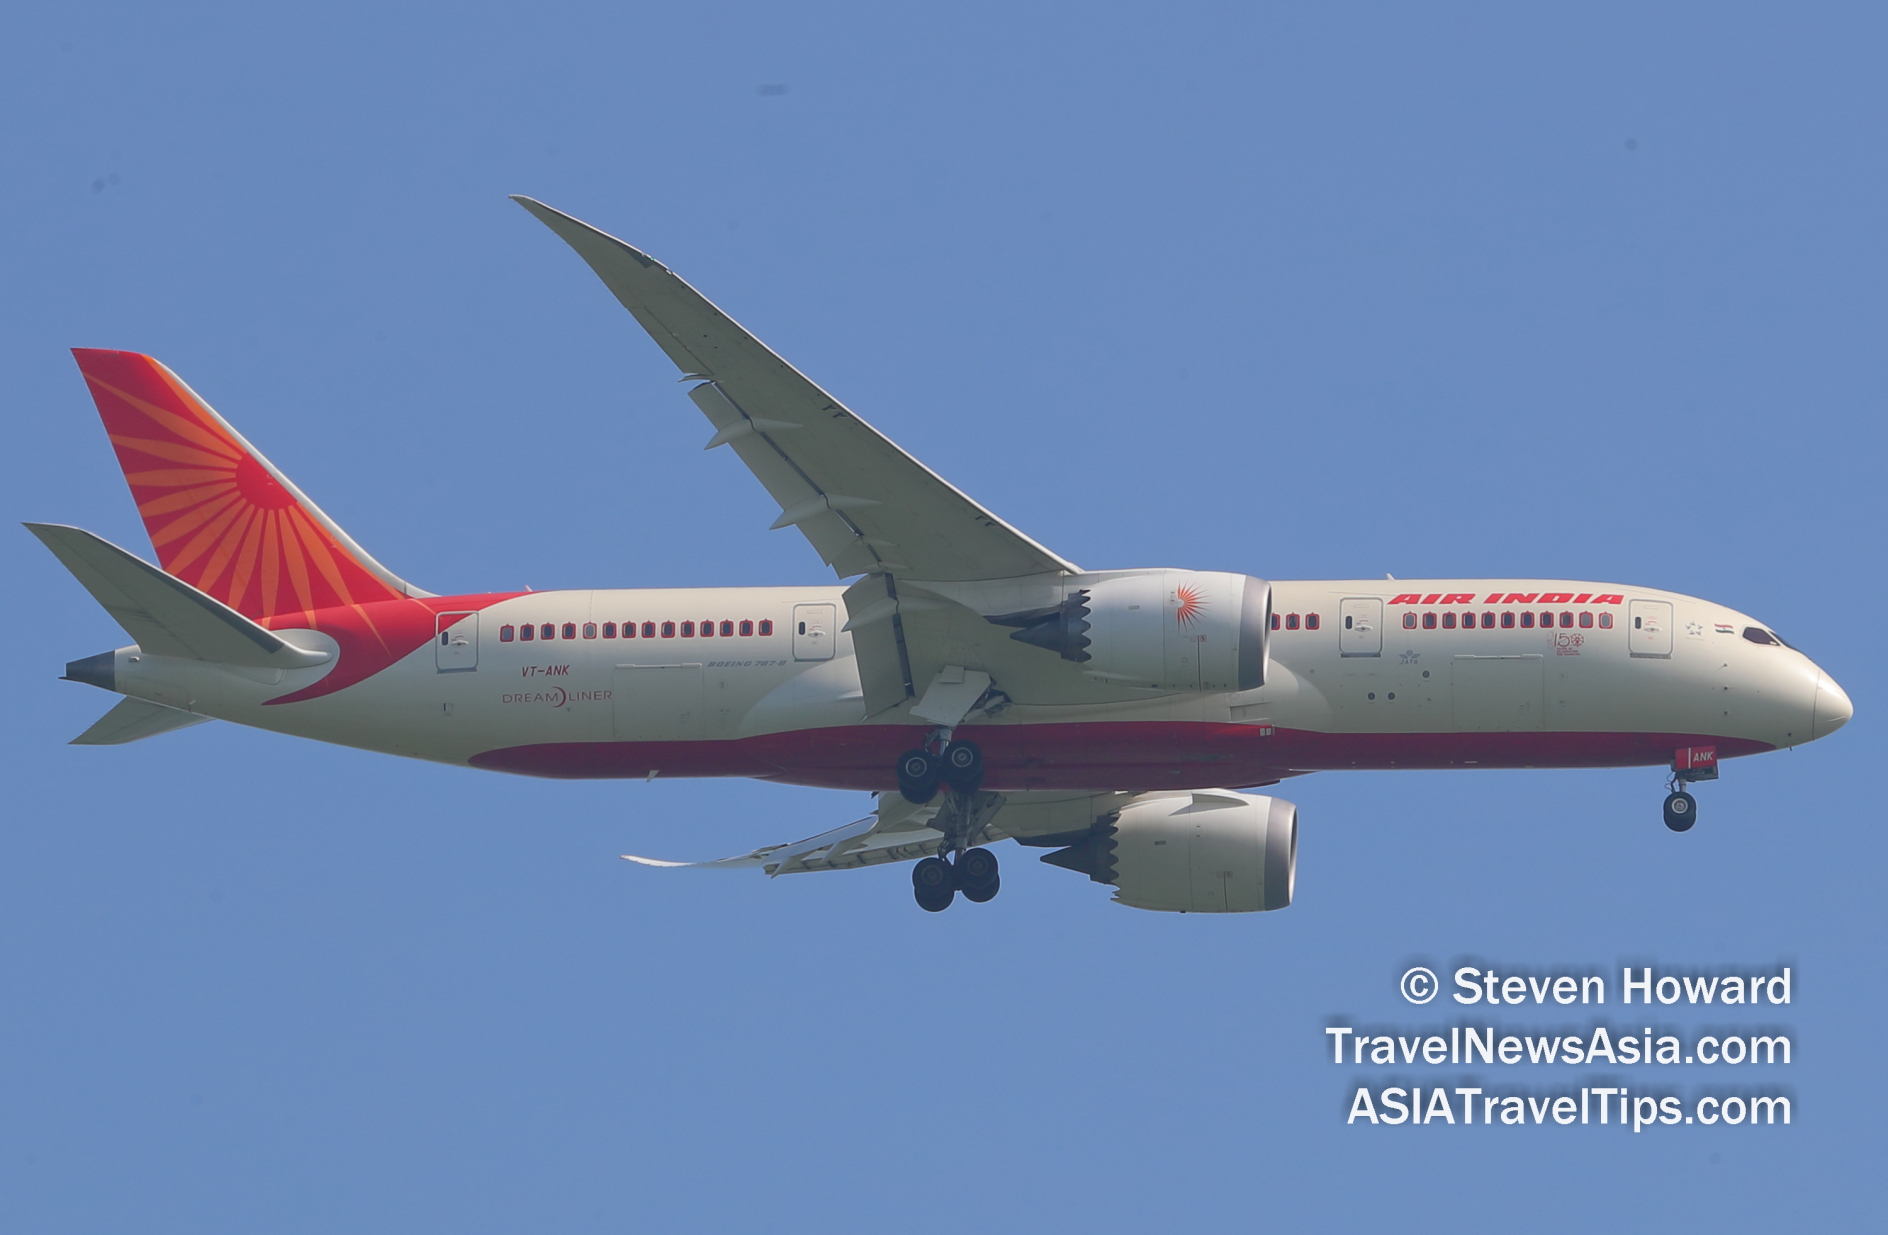 Air India Boeing 787-8 reg: VT-ANK. Picture by Steven Howard of TravelNewsAsia.com Click to enlarge.